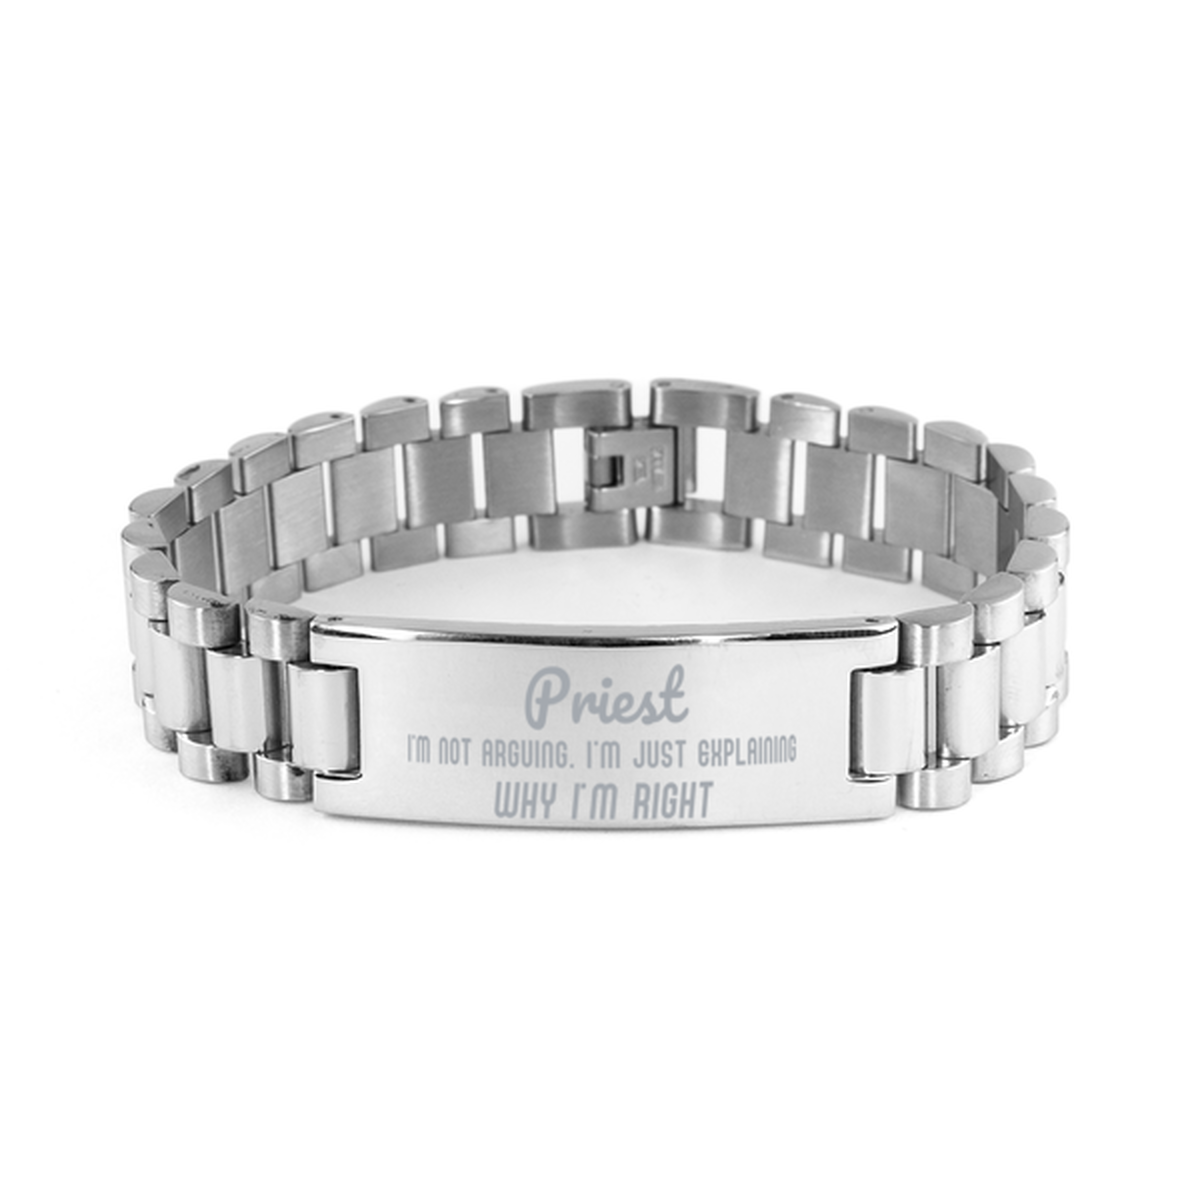 Priest I'm not Arguing. I'm Just Explaining Why I'm RIGHT Ladder Stainless Steel Bracelet, Graduation Birthday Christmas Priest Gifts For Priest Funny Saying Quote Present for Men Women Coworker